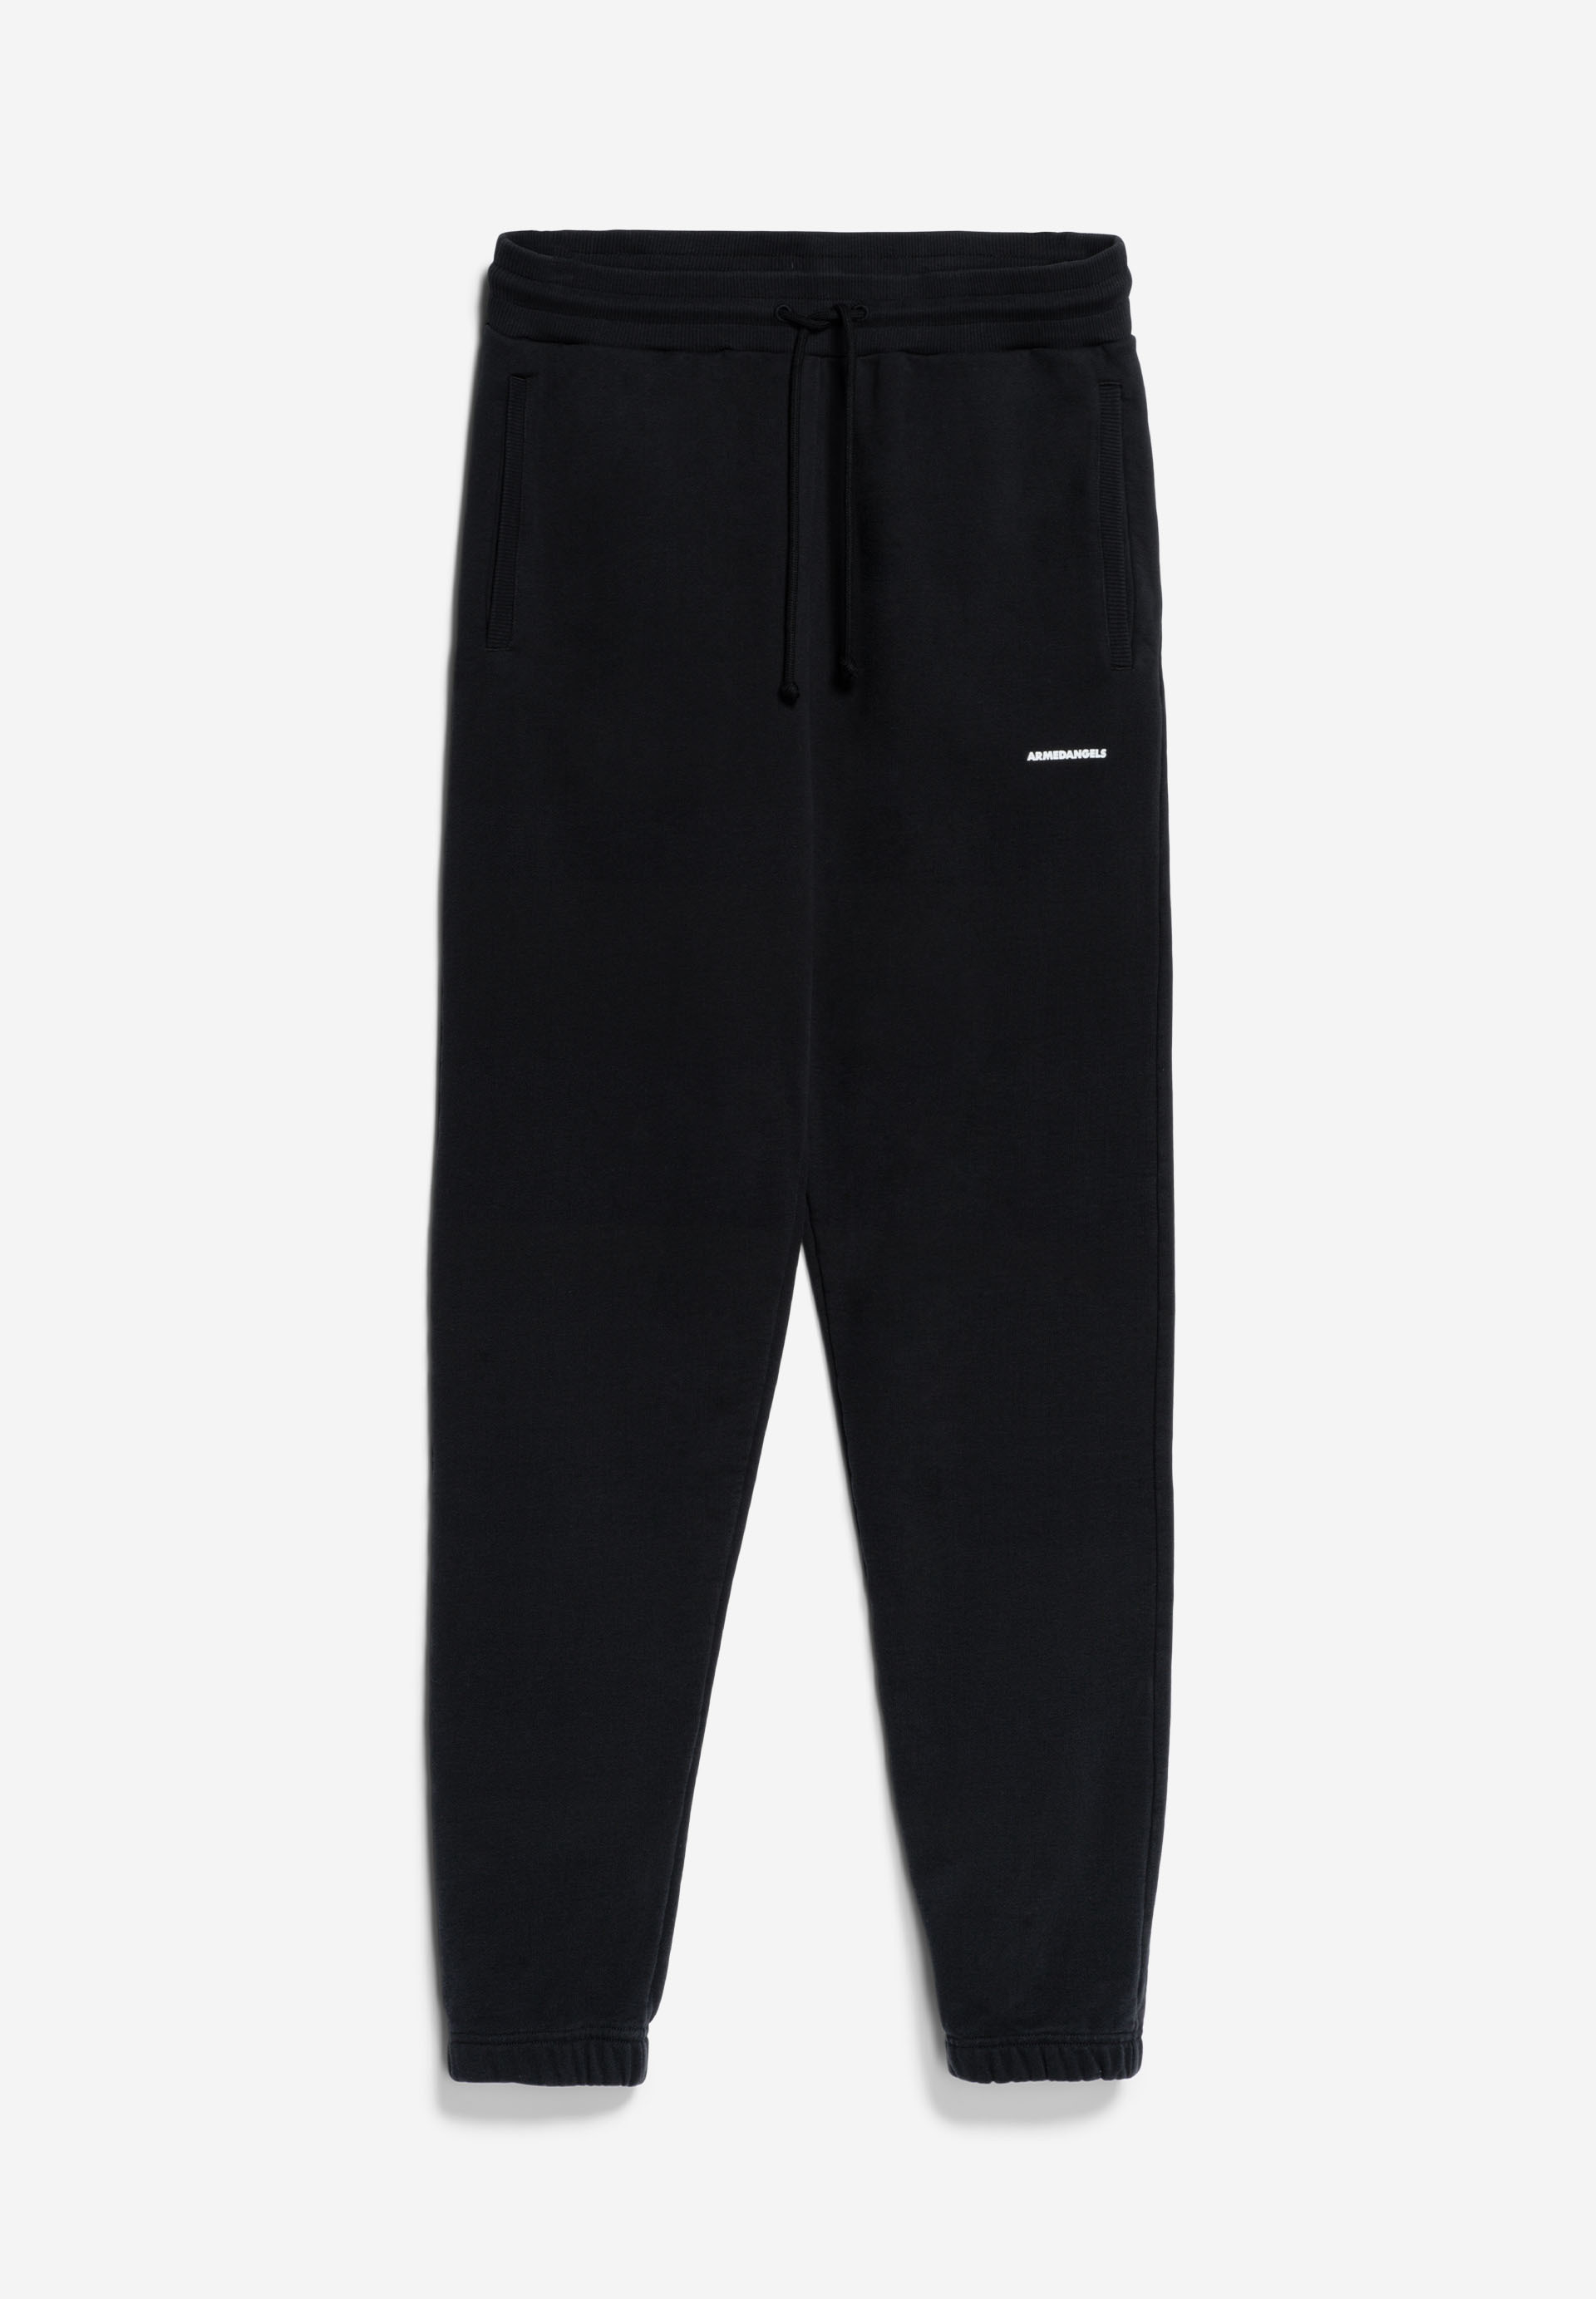 KAABONO PREMIUM Sweat Pants Relaxed Fit made of Organic Cotton Mix